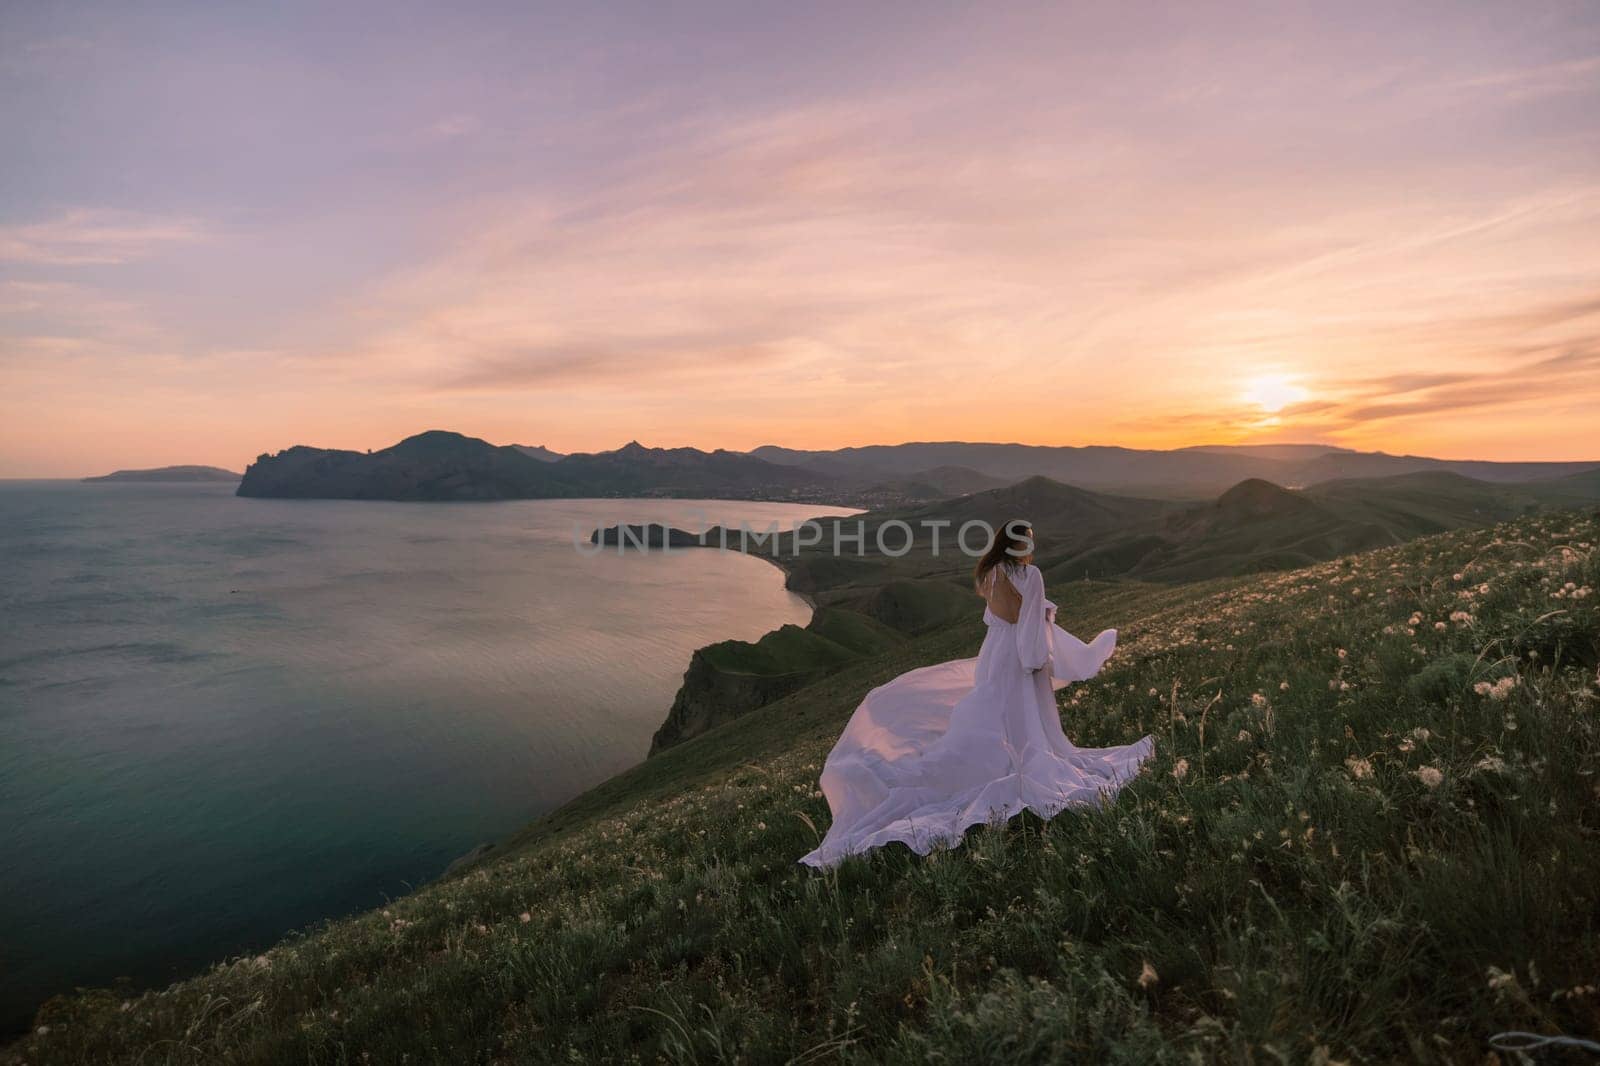 A woman in a white dress is walking on a grassy hill overlooking a body of water by Matiunina